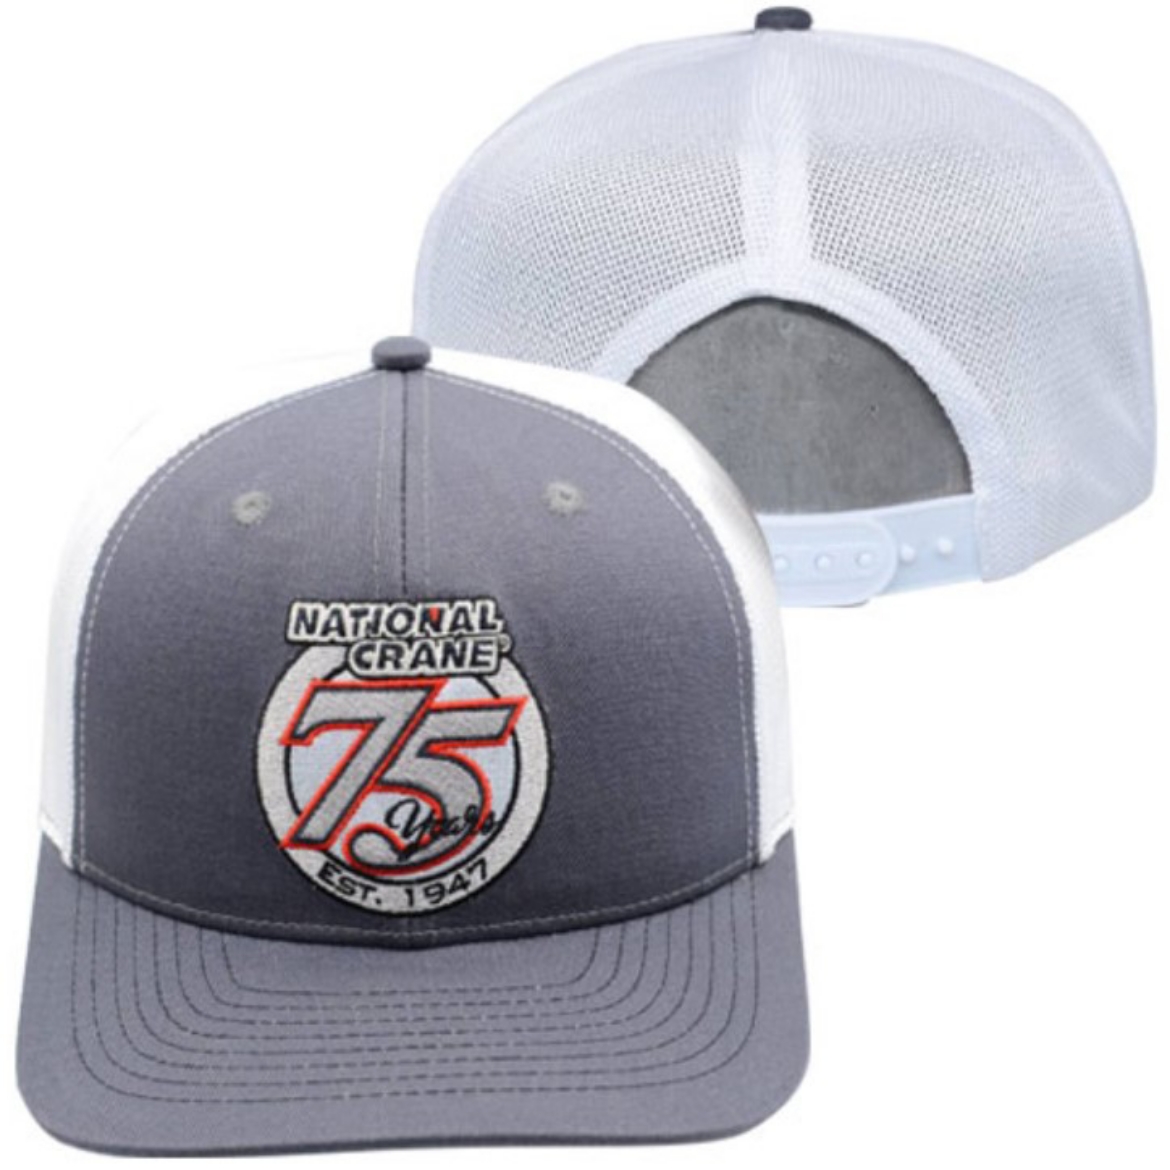 Picture of National Crane 75th Anniversary Cap